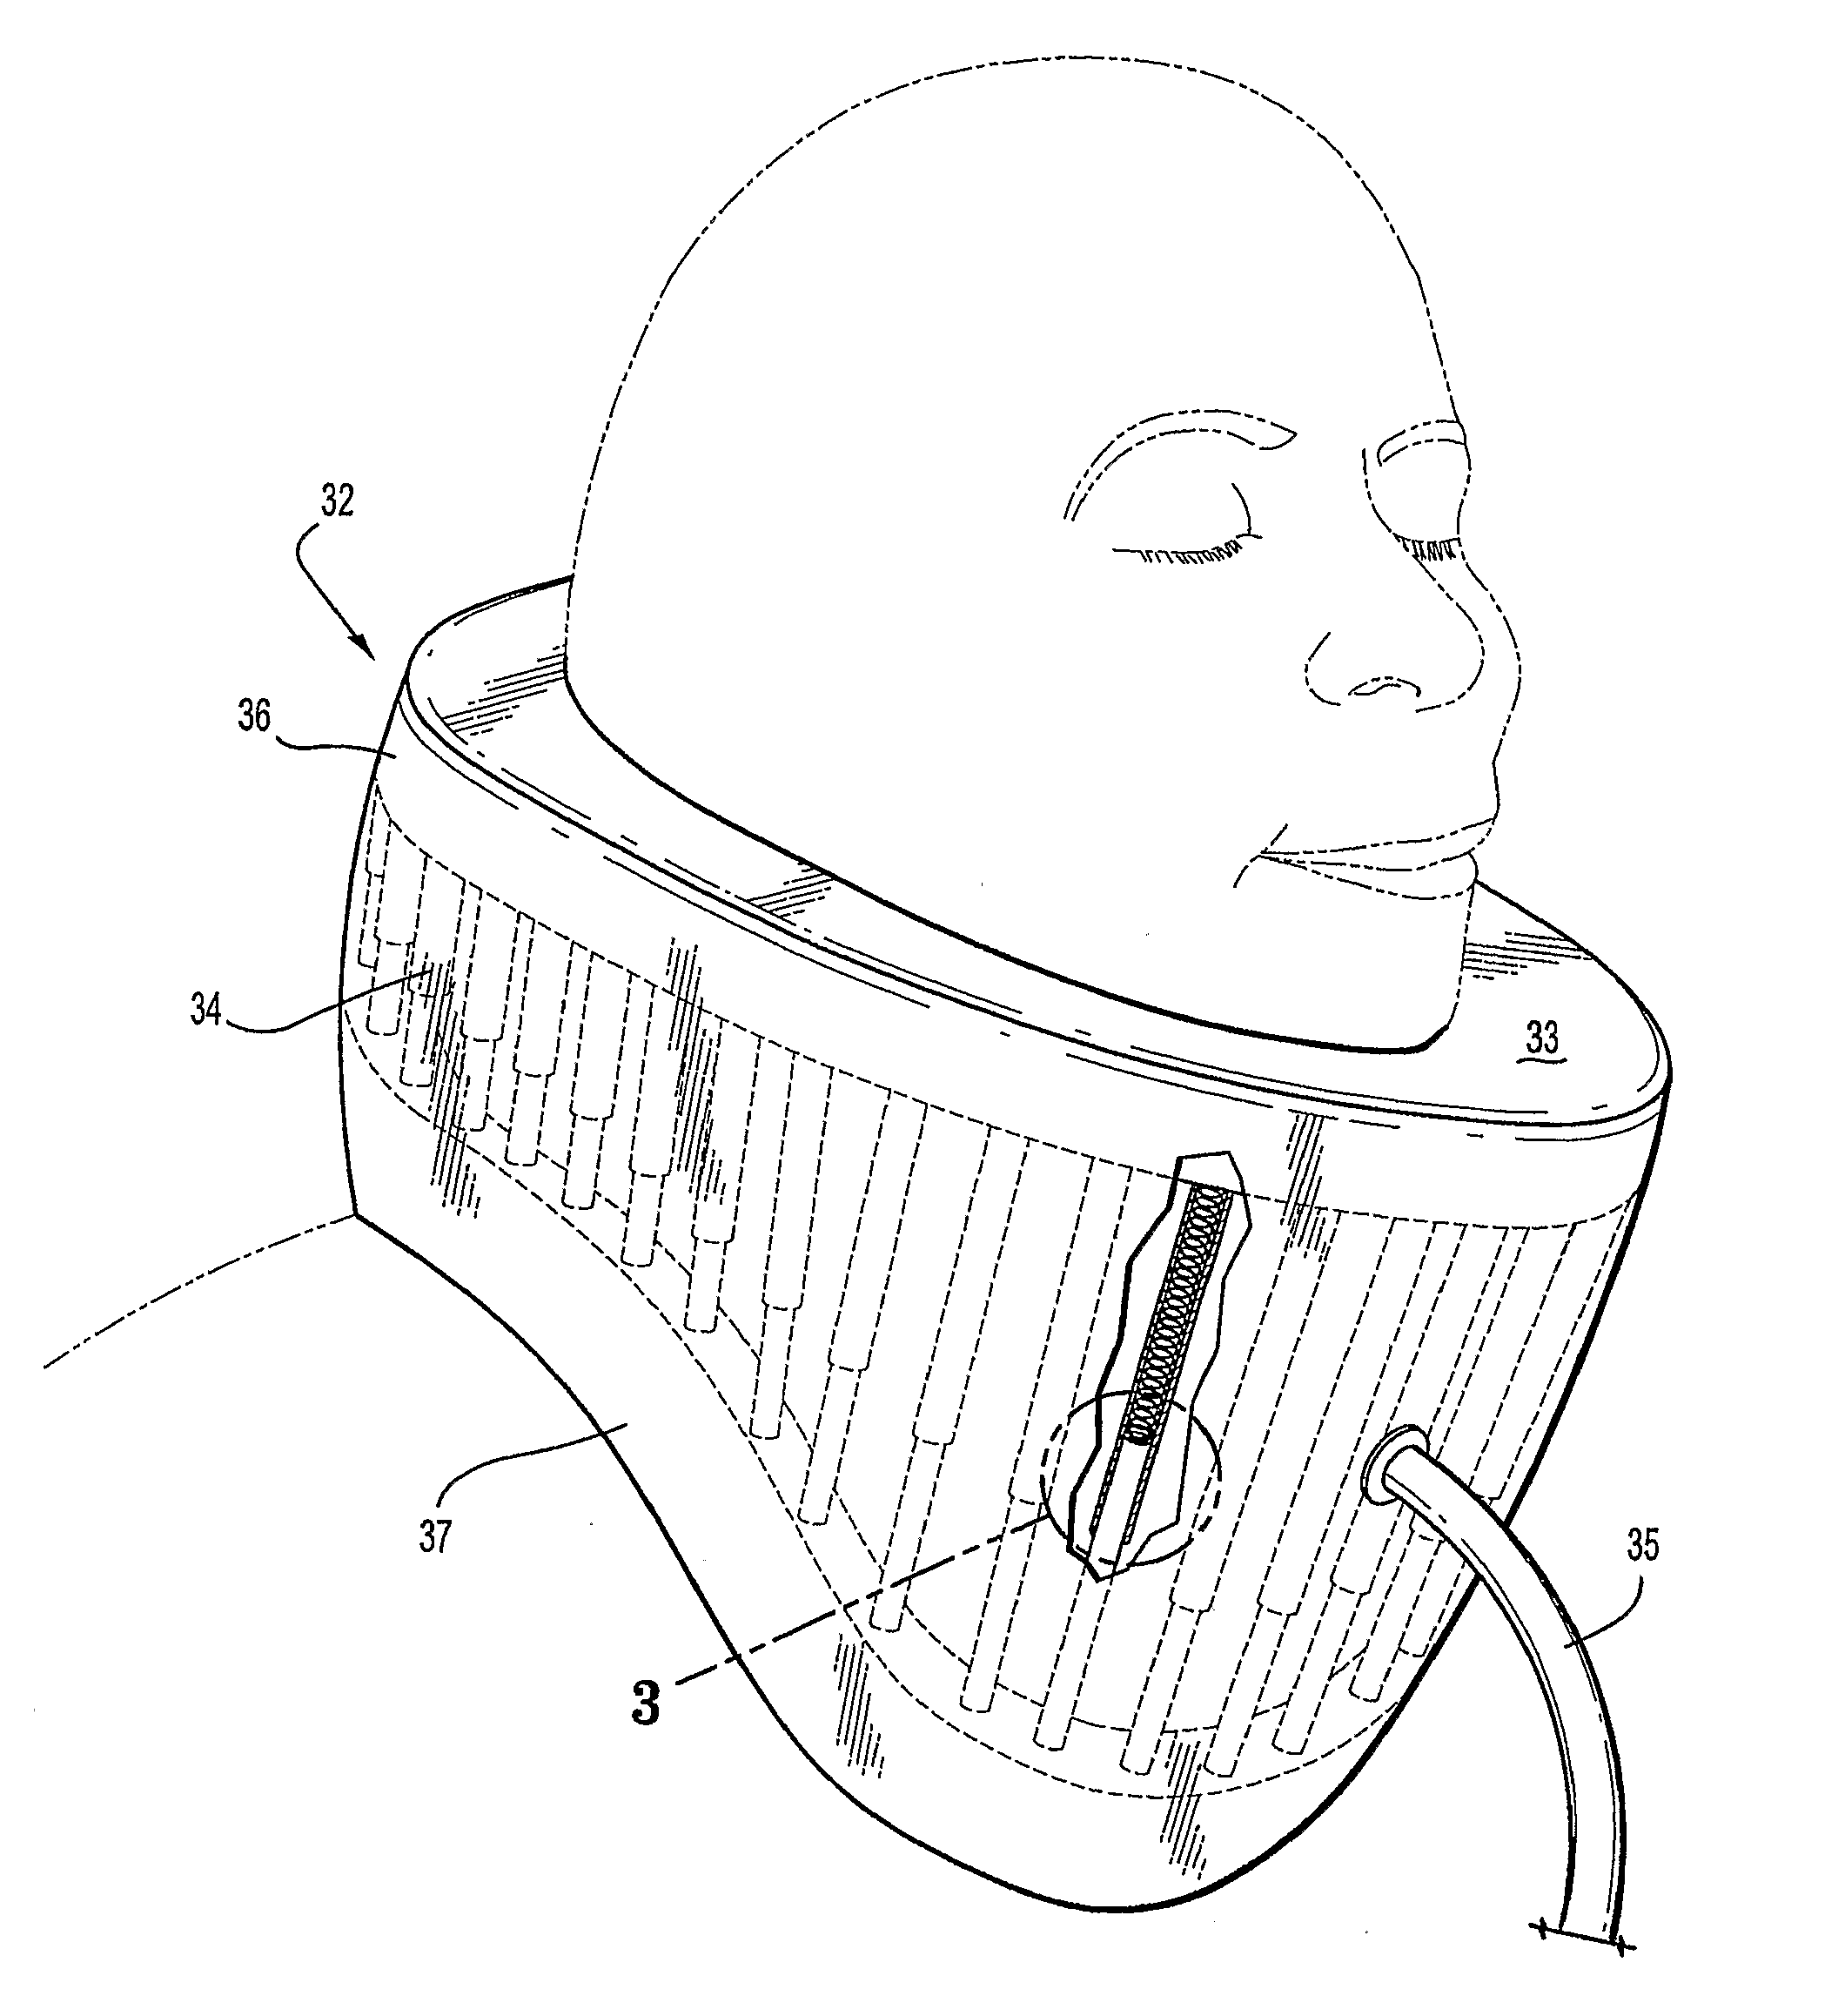 Therapeutic Cushioning and Devices for Assisting Respiration of and administering fluid to a patient